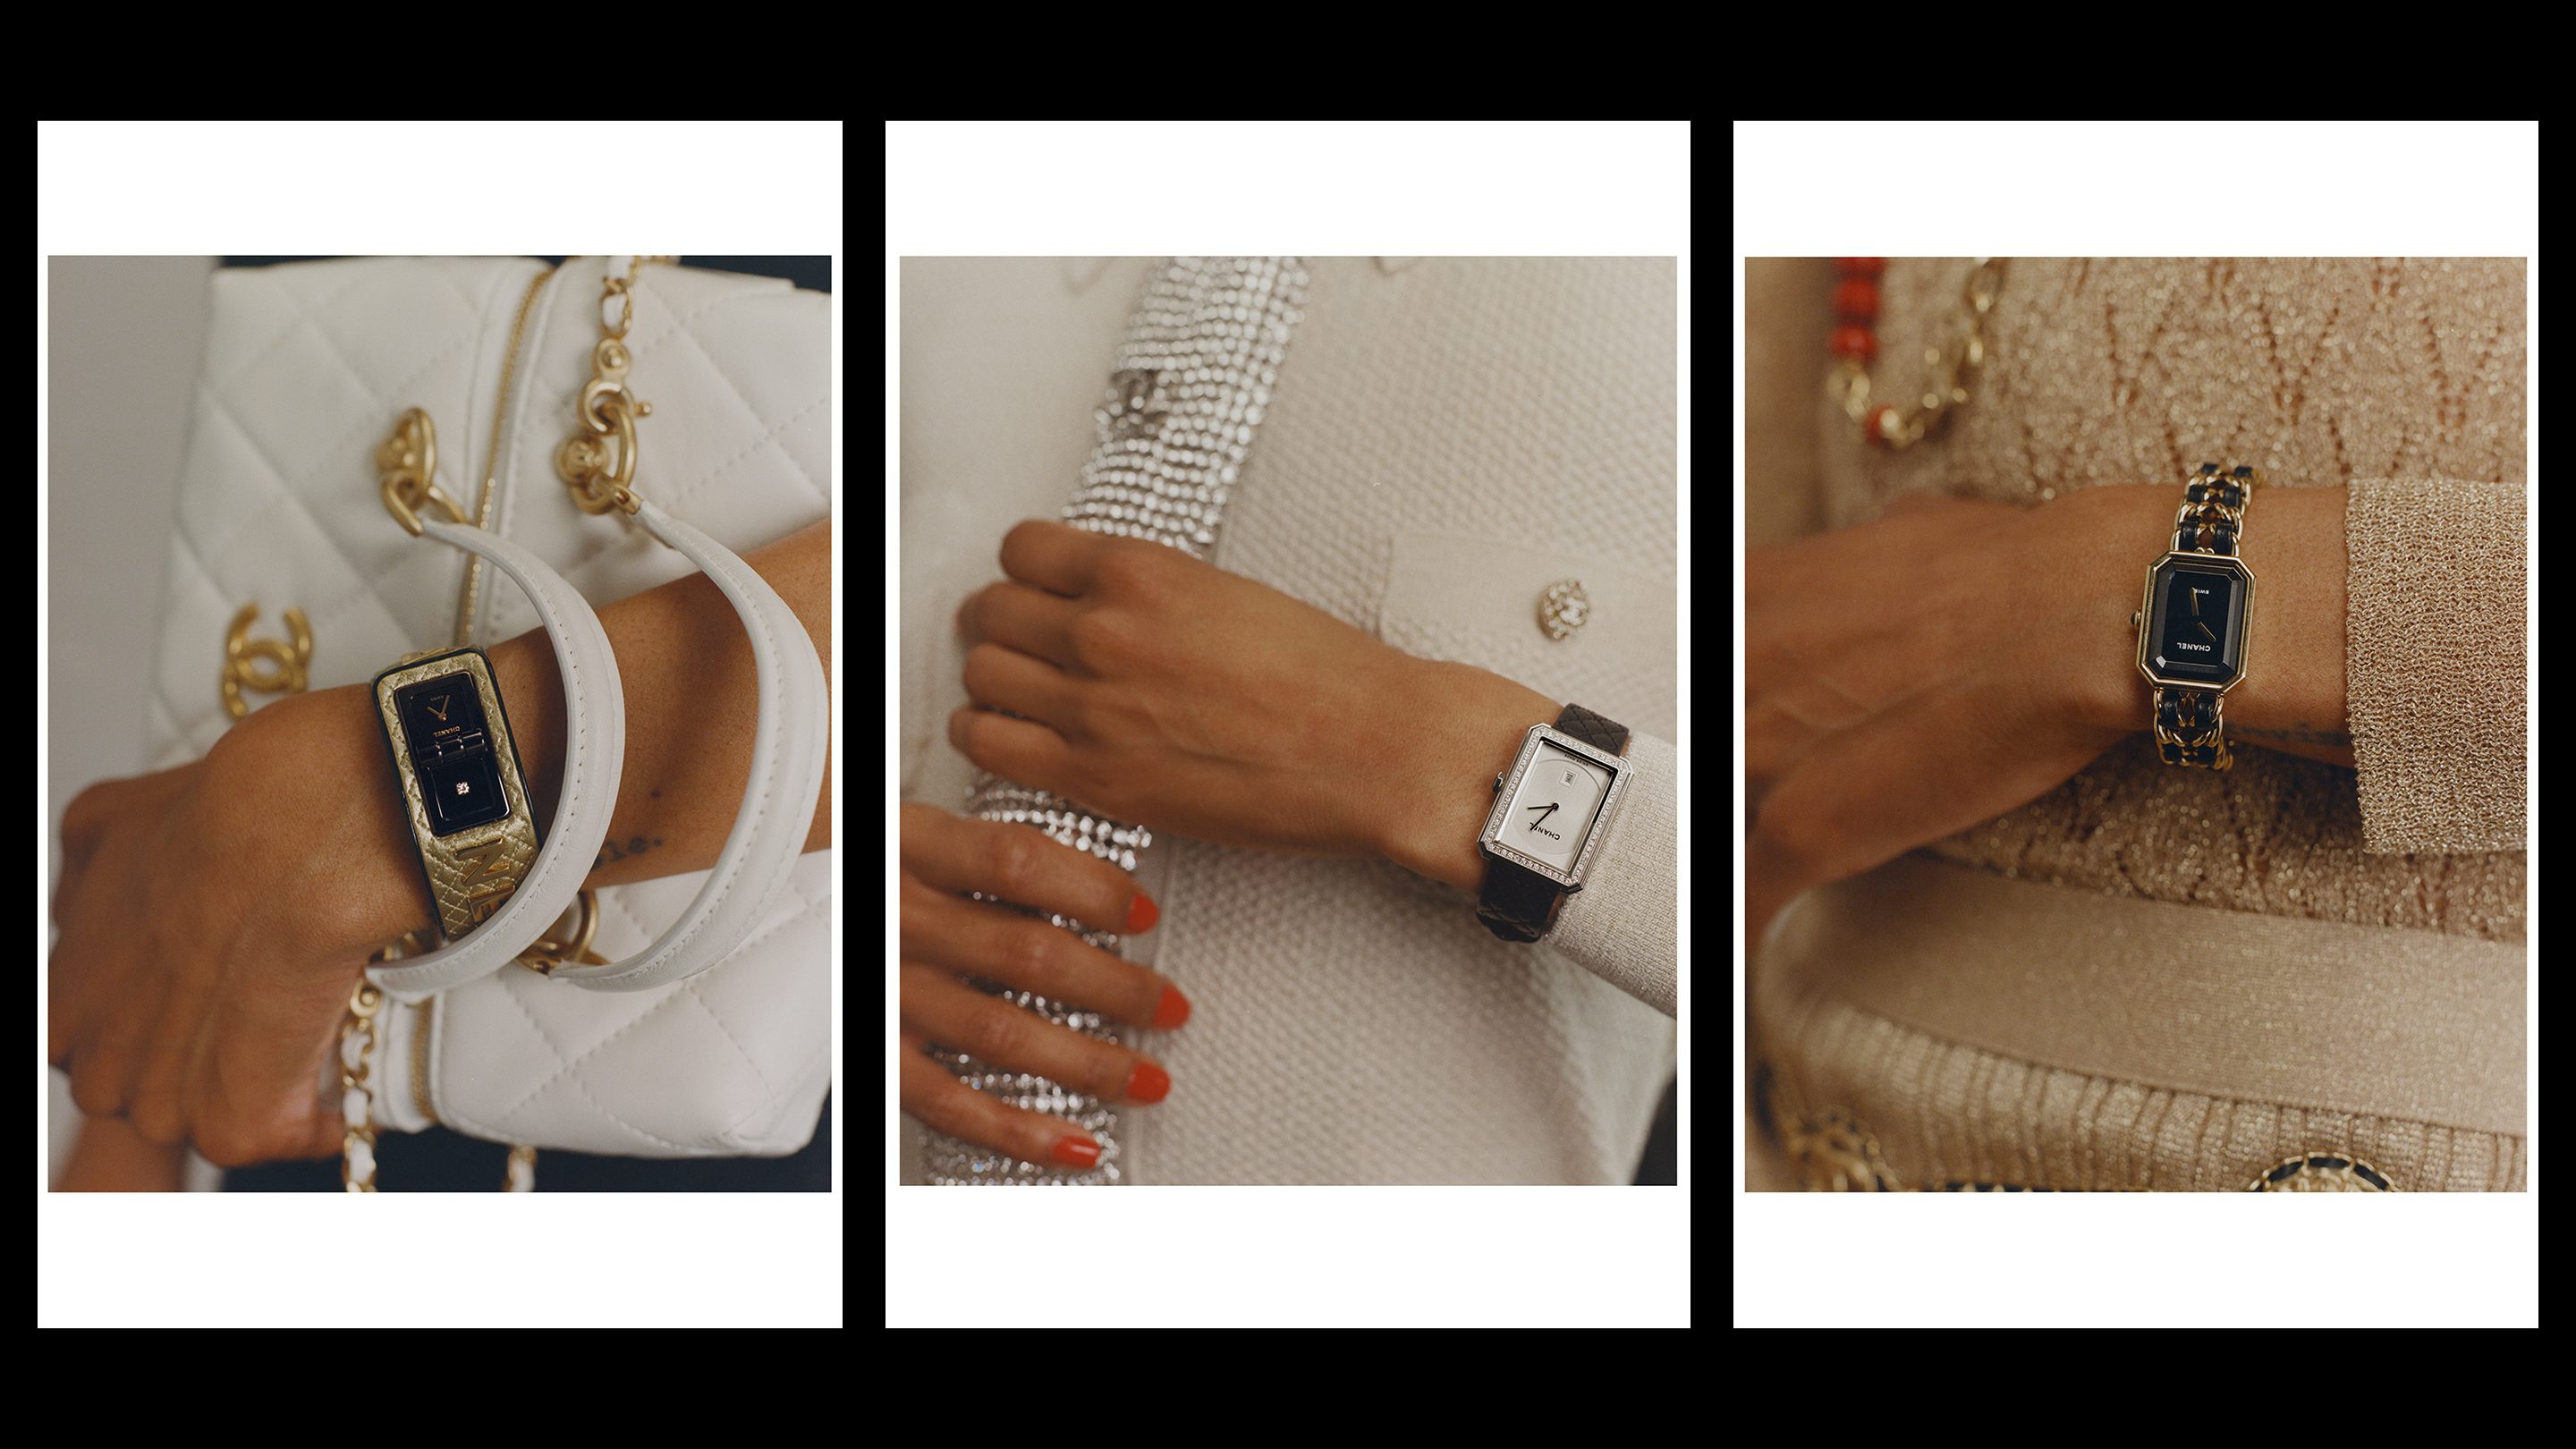 Discover a Chanel Bracelet in Iconic Brand Motifs